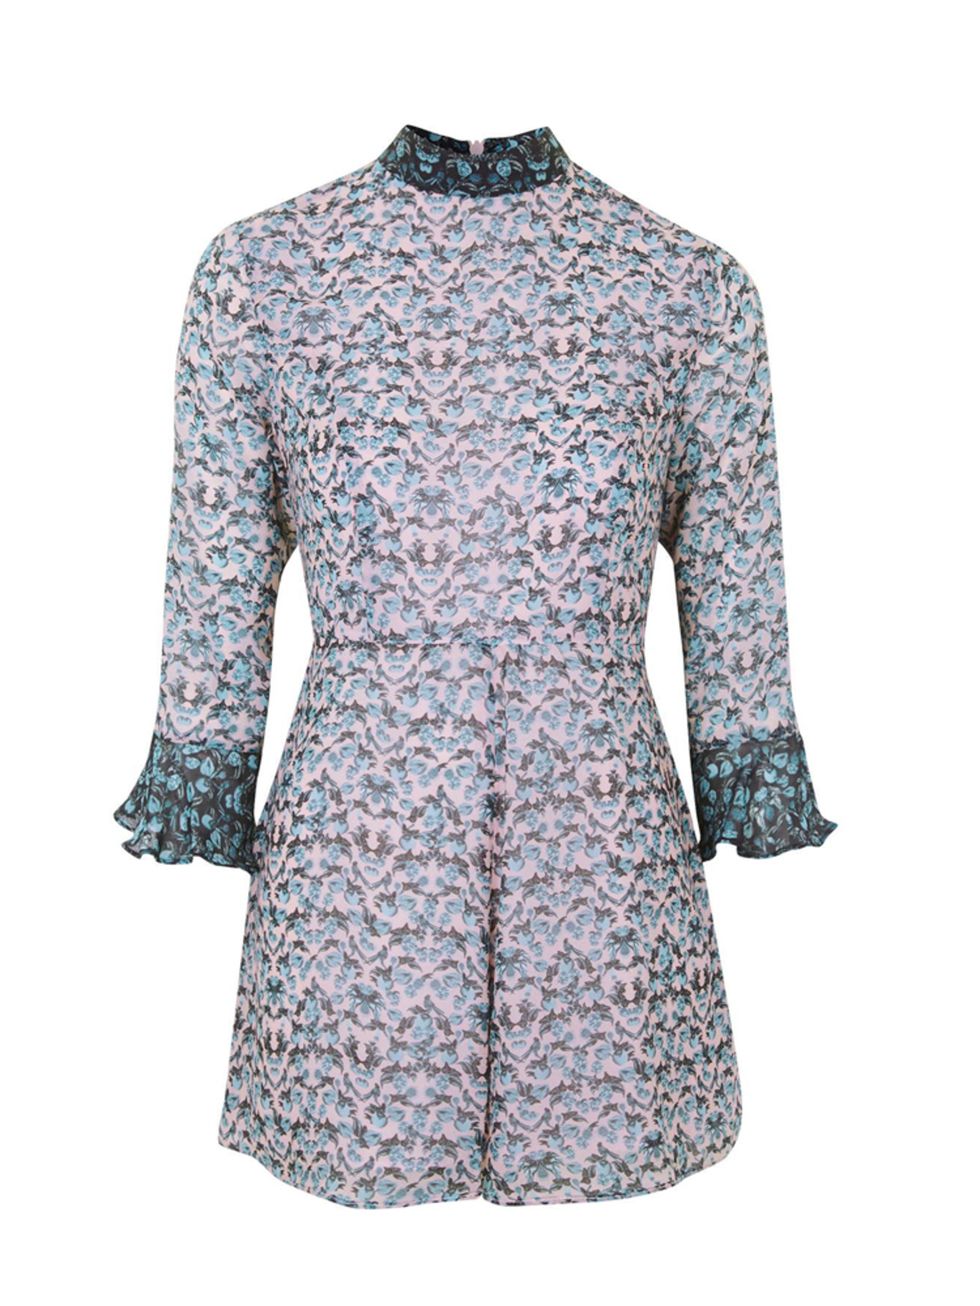 <p>Freelance Beauty Contributor Natalie Lukaitis will wear this boho playsuit with knee high gladiator sandals.</p>

<p> </p>

<p><a href="http://www.topshop.com/en/tsuk/product/new-in-this-week-2169932/floral-playsuit-4555244?bi=1&ps=200" target="_blank"